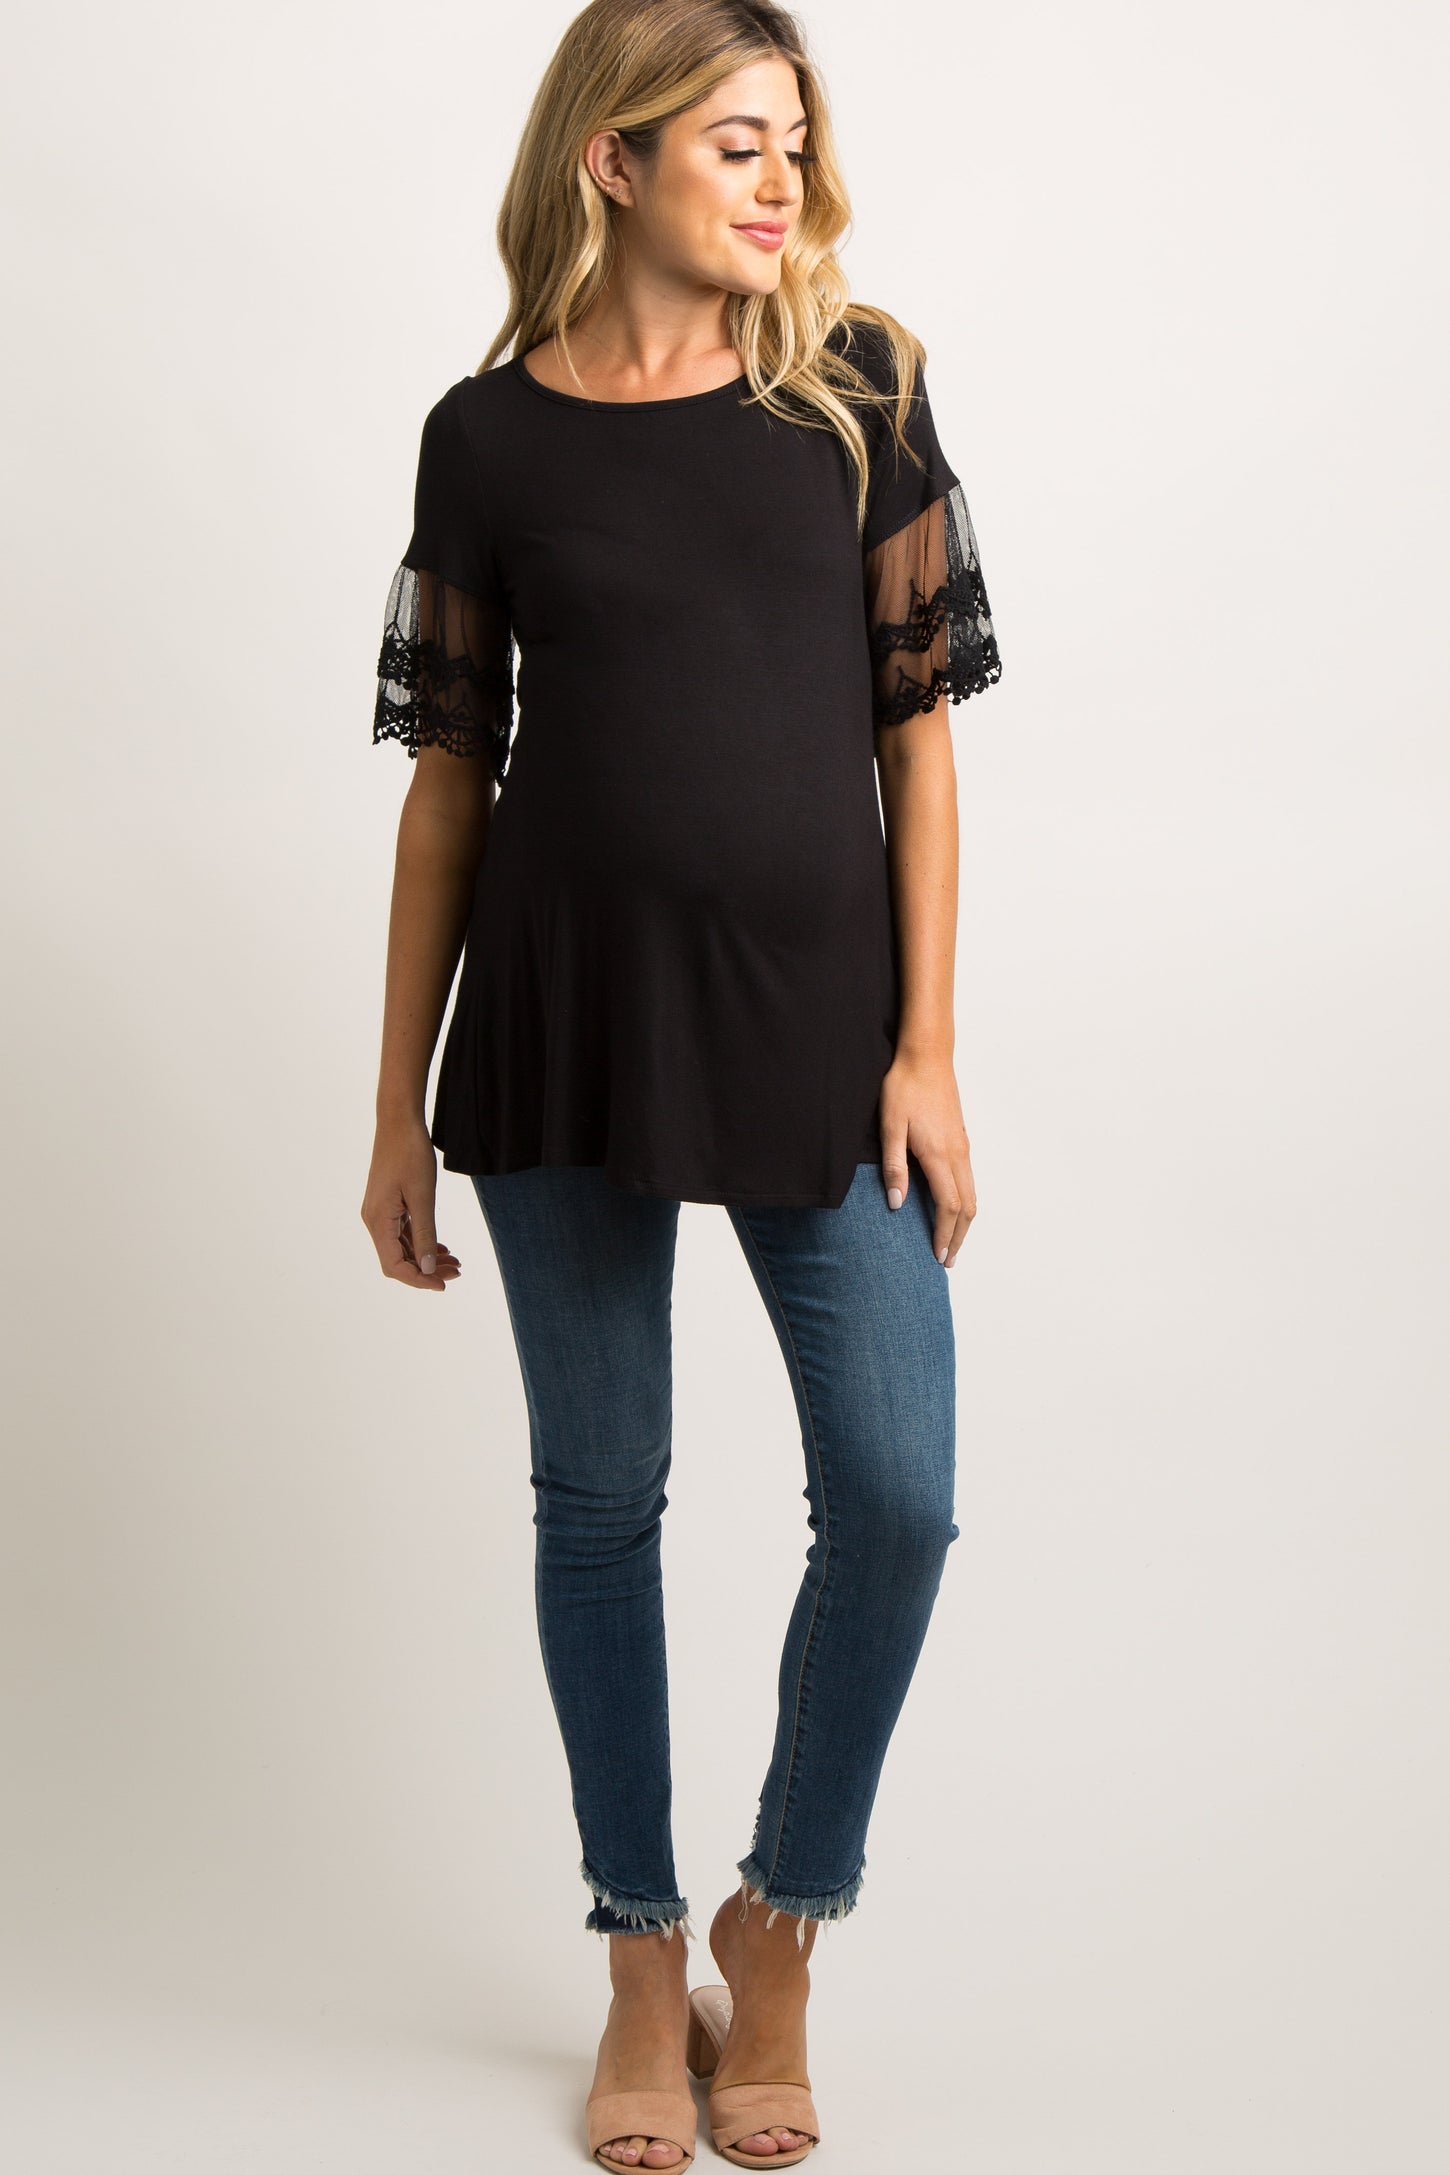 Black Lace Short Sleeve Maternity Top